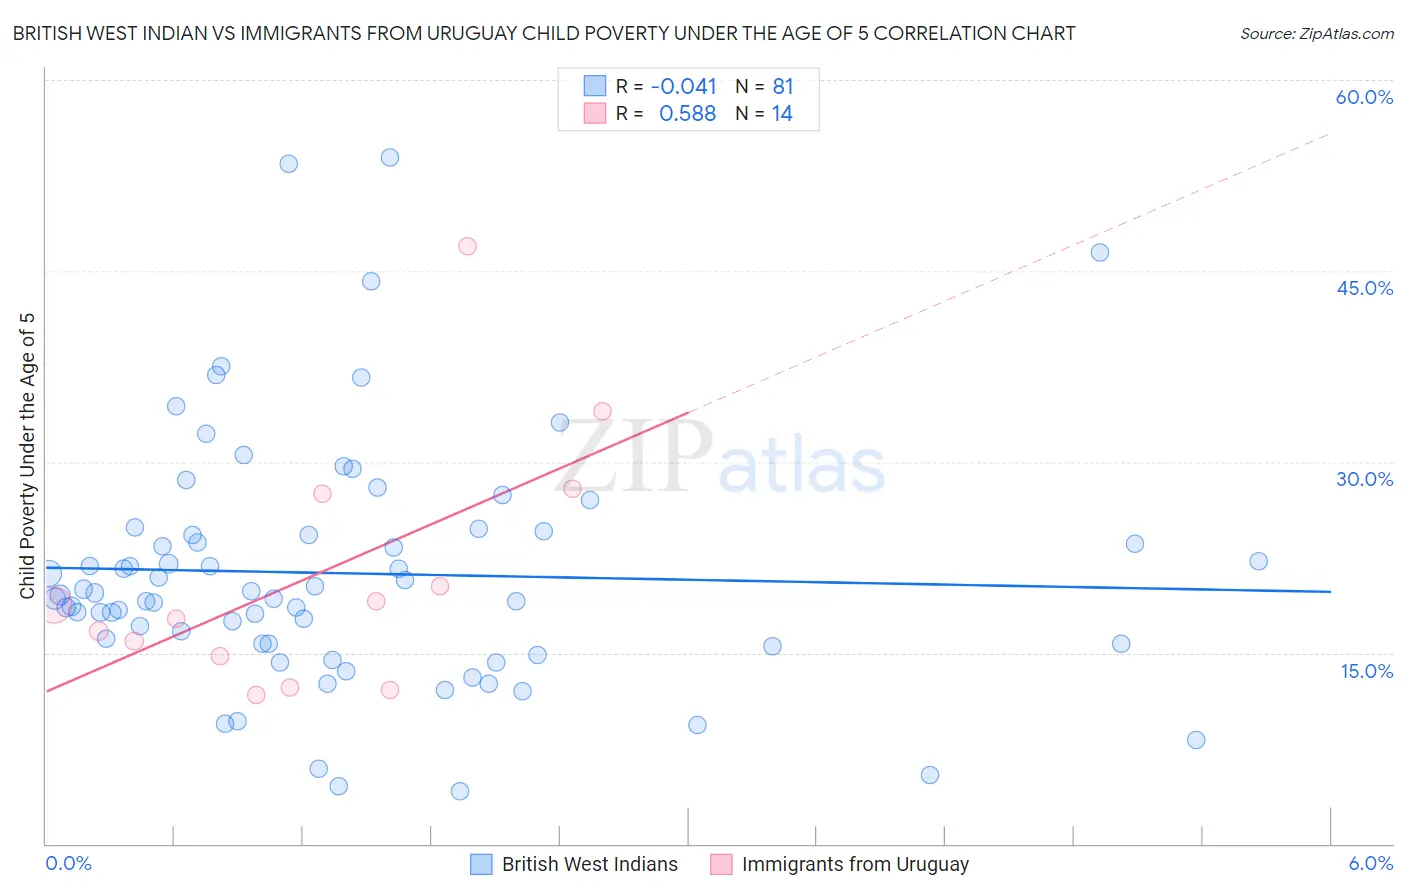 British West Indian vs Immigrants from Uruguay Child Poverty Under the Age of 5